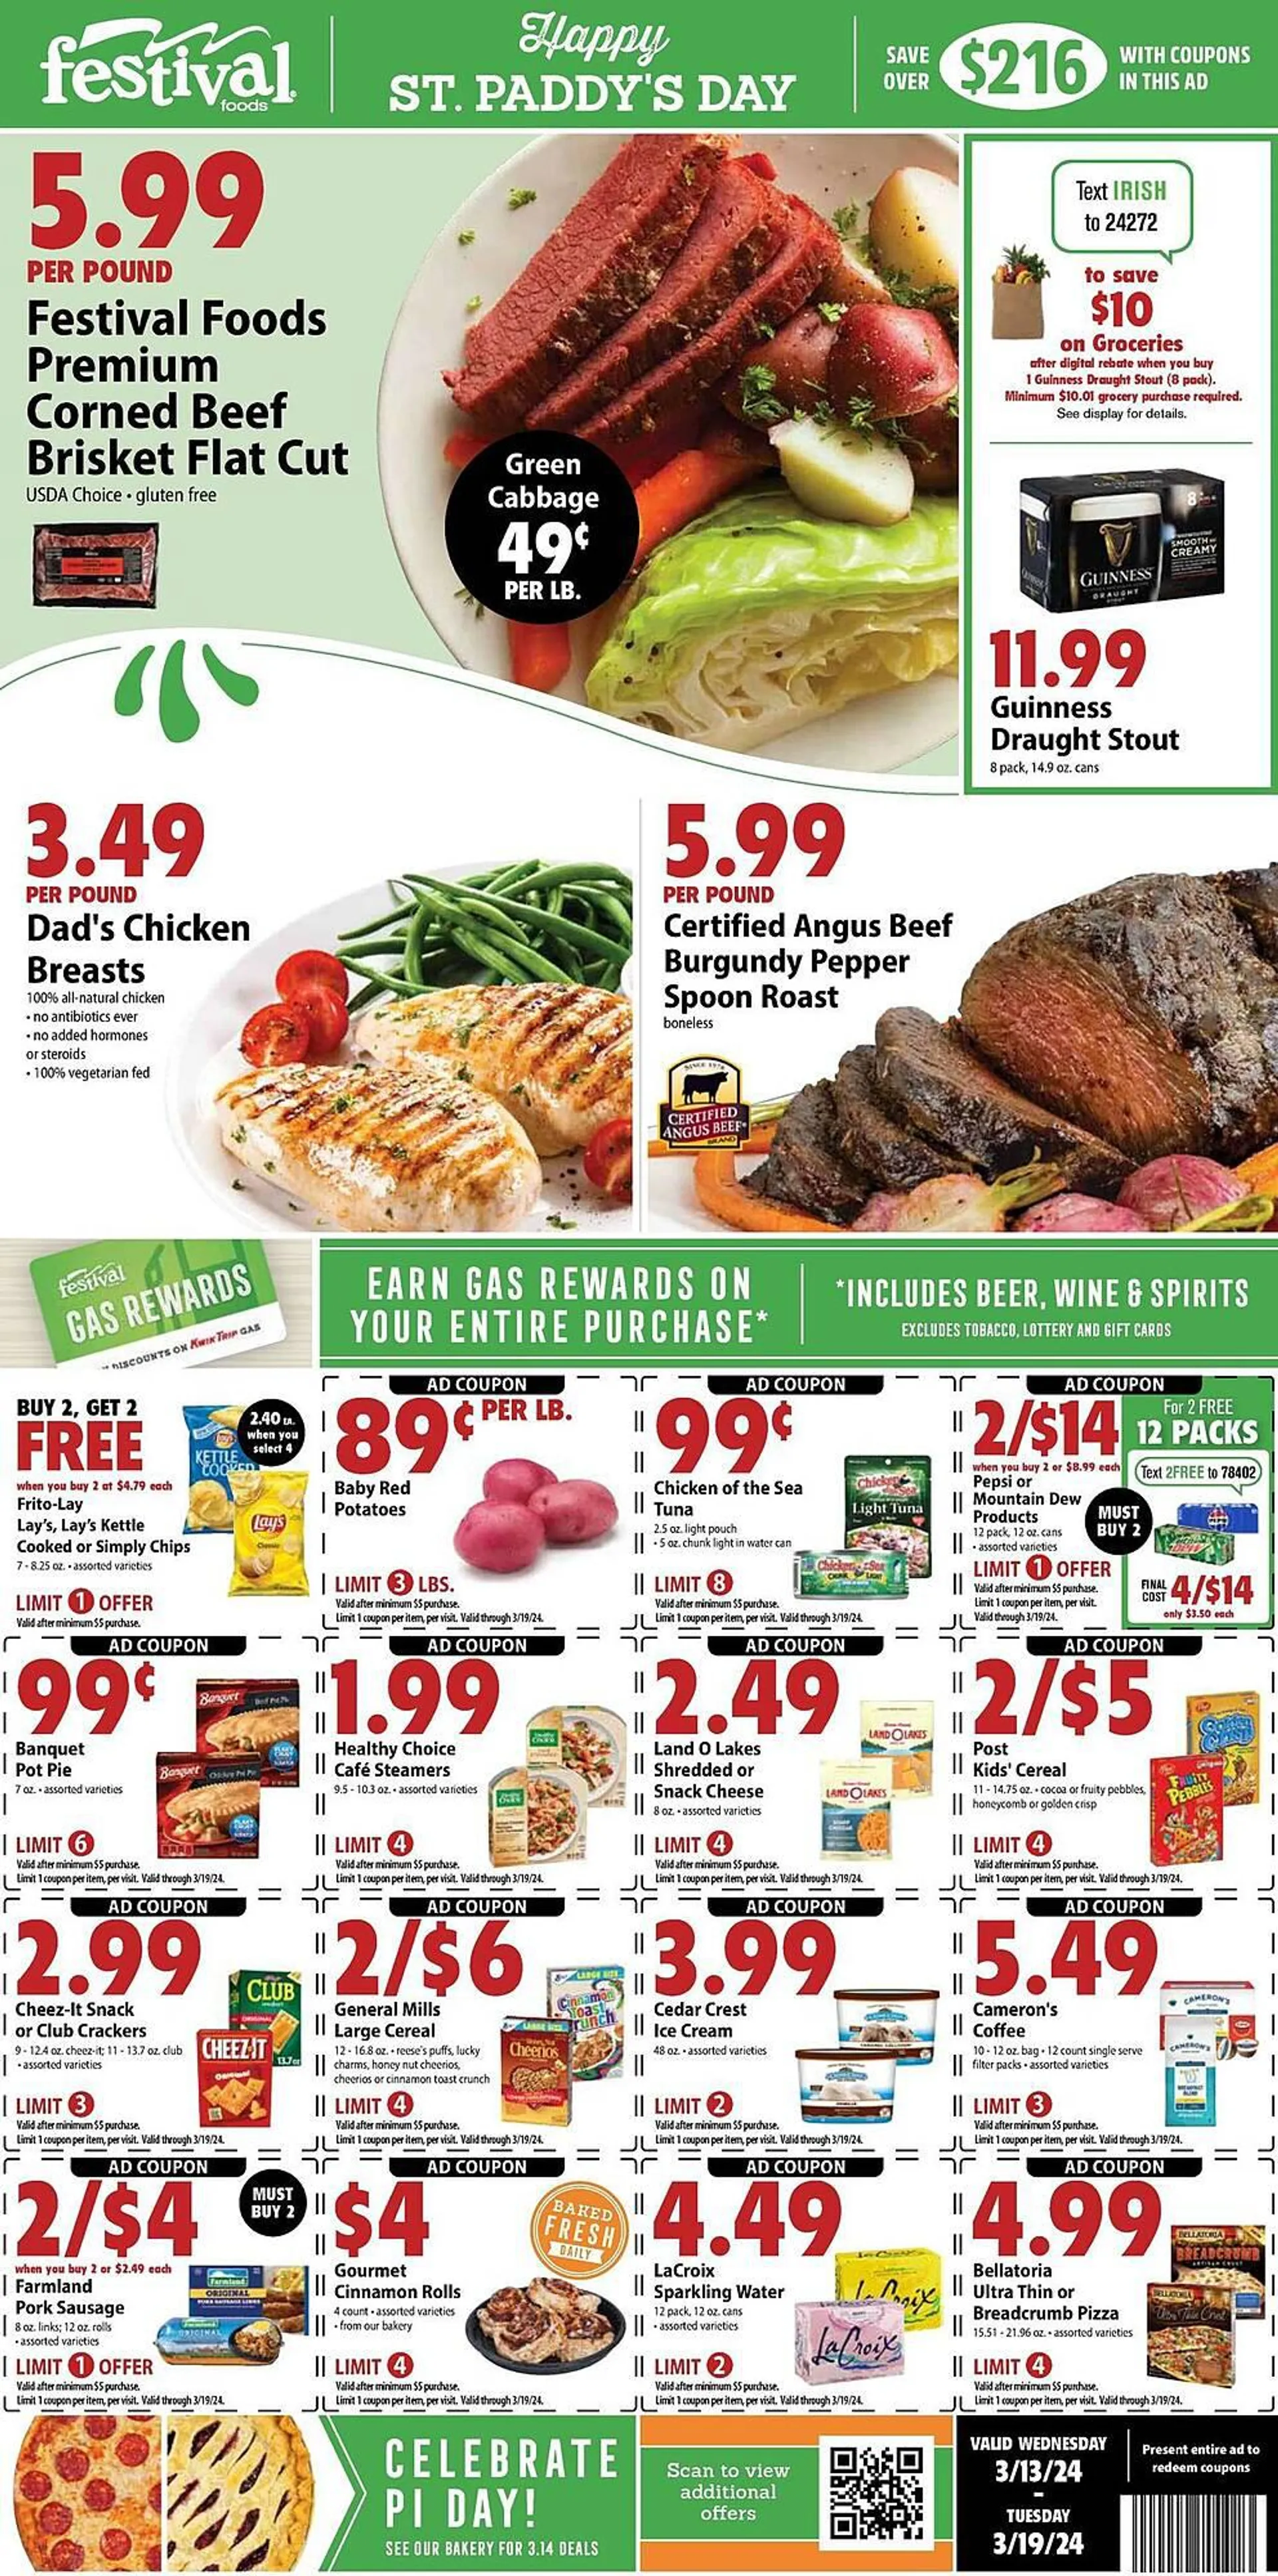 Weekly ad Festival Foods Weekly Ad from March 13 to March 19 2024 - Page 1